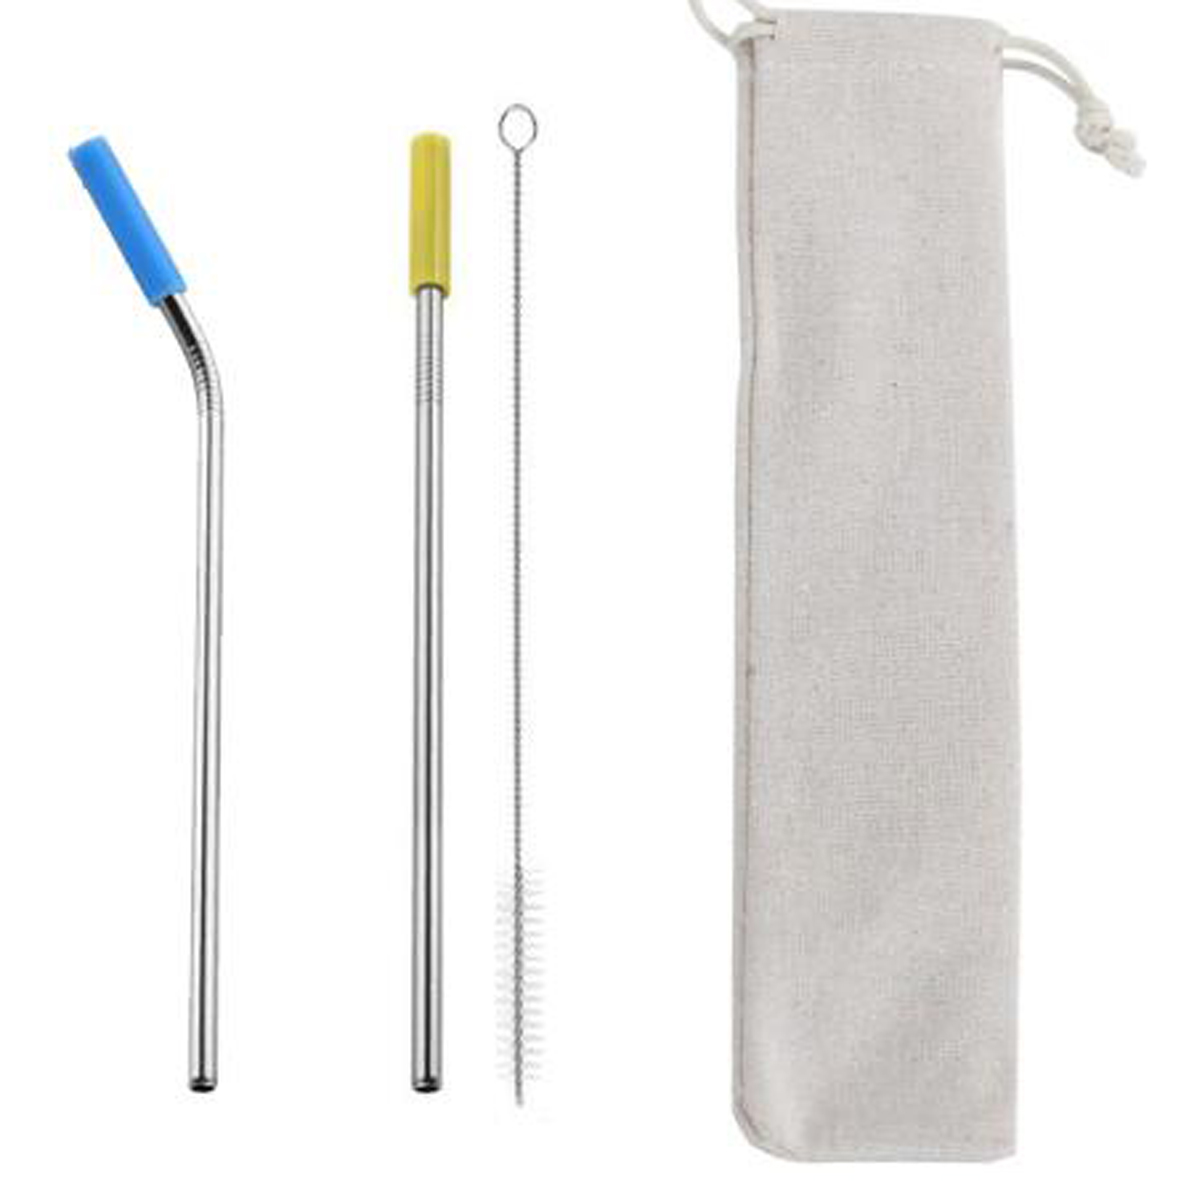 GL-ELY1255 3 in 1 Stainless Steel Straw Set with Silicone Tip